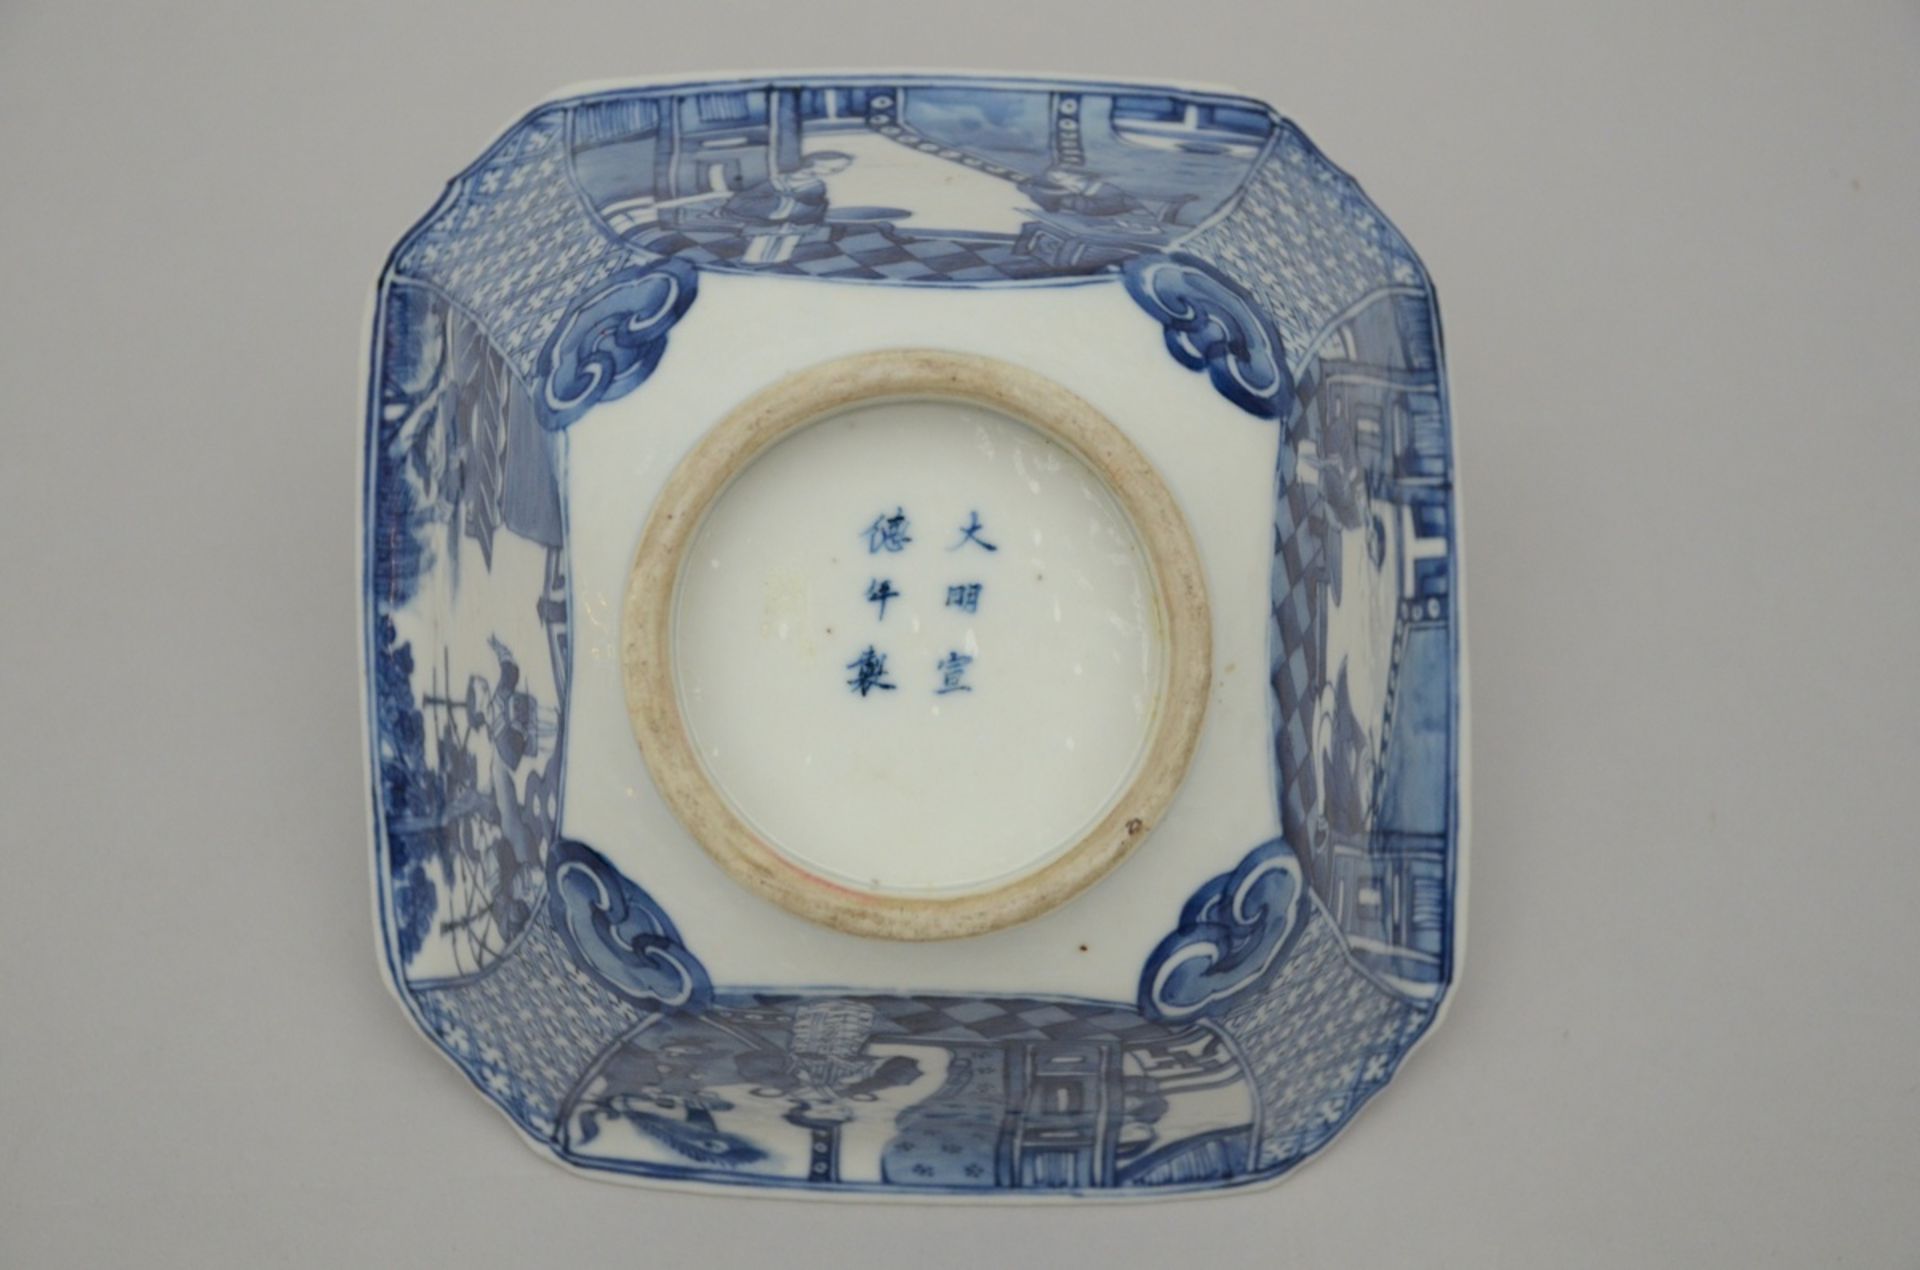 Chinese octagonal bowl in blue and white porcelain 'romantic scenes' 19th century (11.5x21x20.5cm) - Image 5 of 5